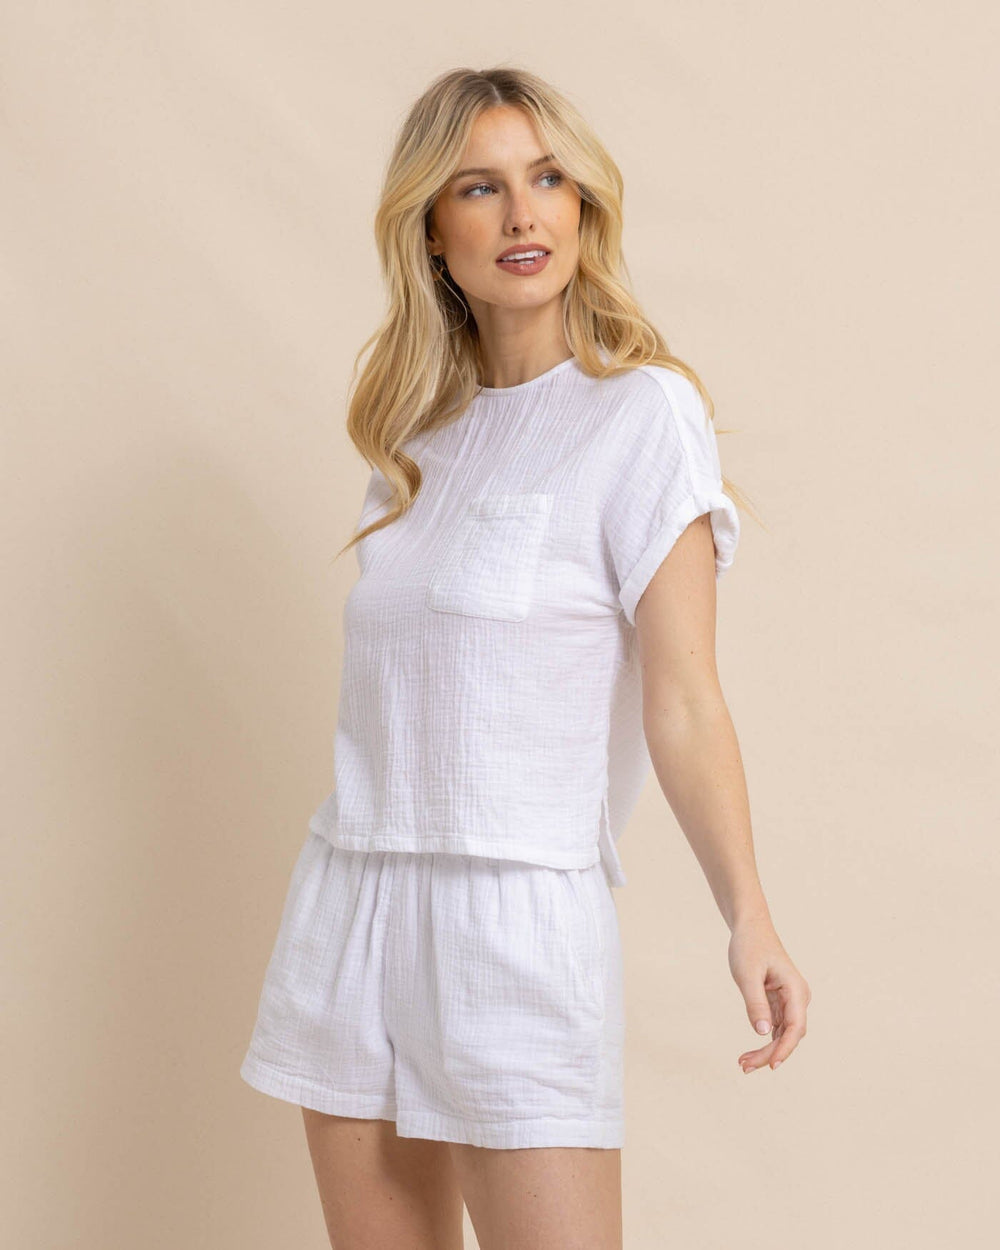 The front view of the Southern Tide Imogen Double Cloth Top by Southern Tide - Classic White